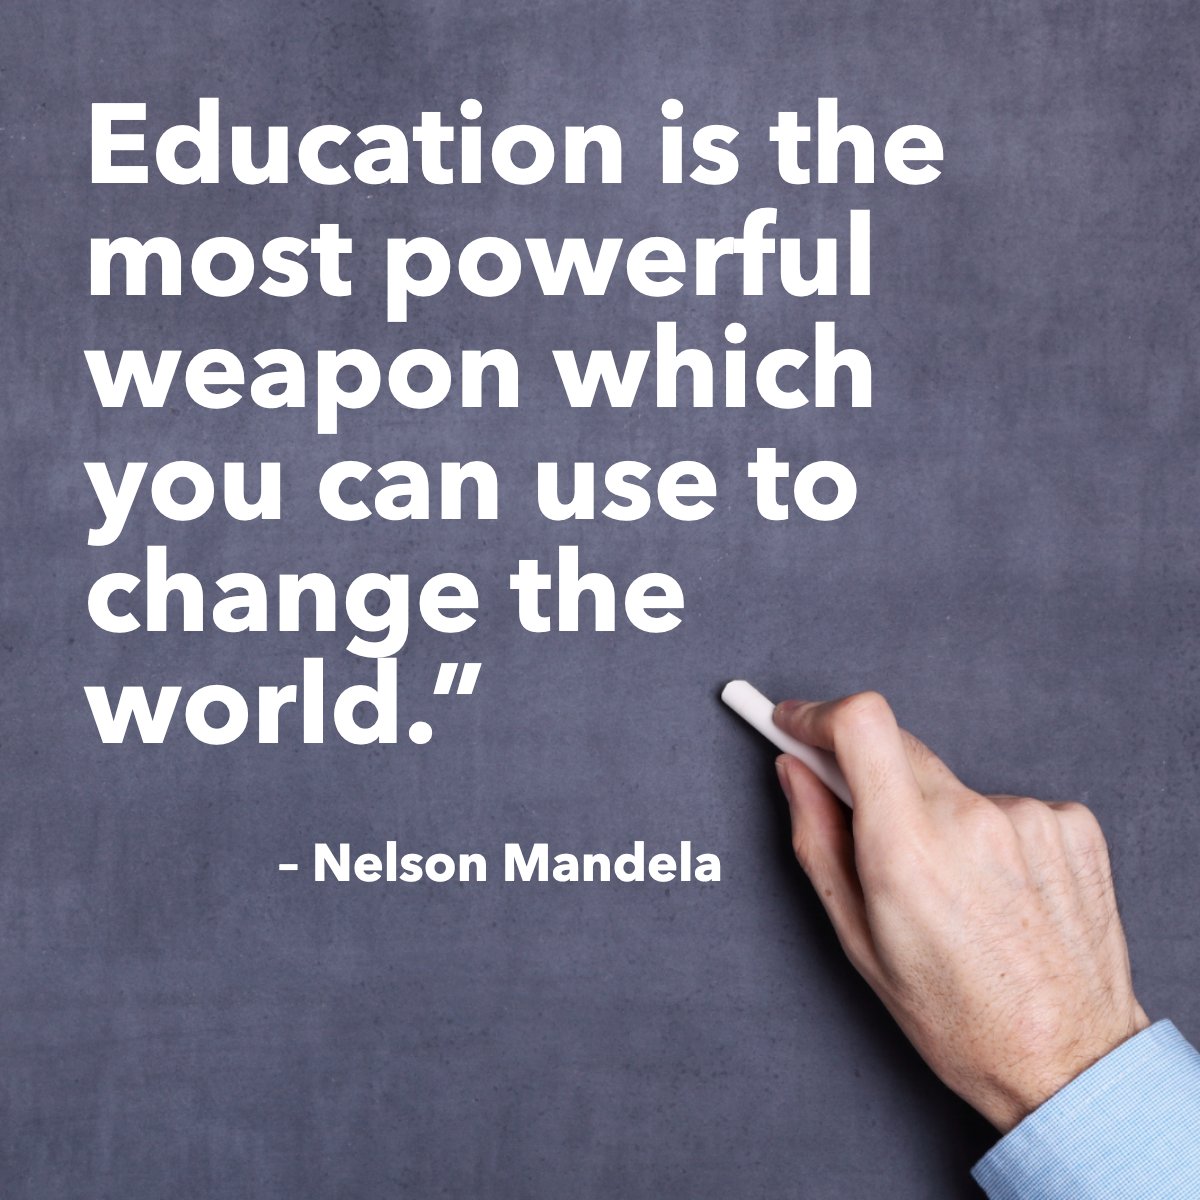 'Education is the most powerful weapon which you can use to change the world' 
— Nelson Mandela  📖

#educationquotes #wisdomquote #wisdomoftheday #quotegram #quoteoftheday #nelsonmandela #educationispower
 #lasvegasrealtor #lasvegasrealestate #sparrowsells